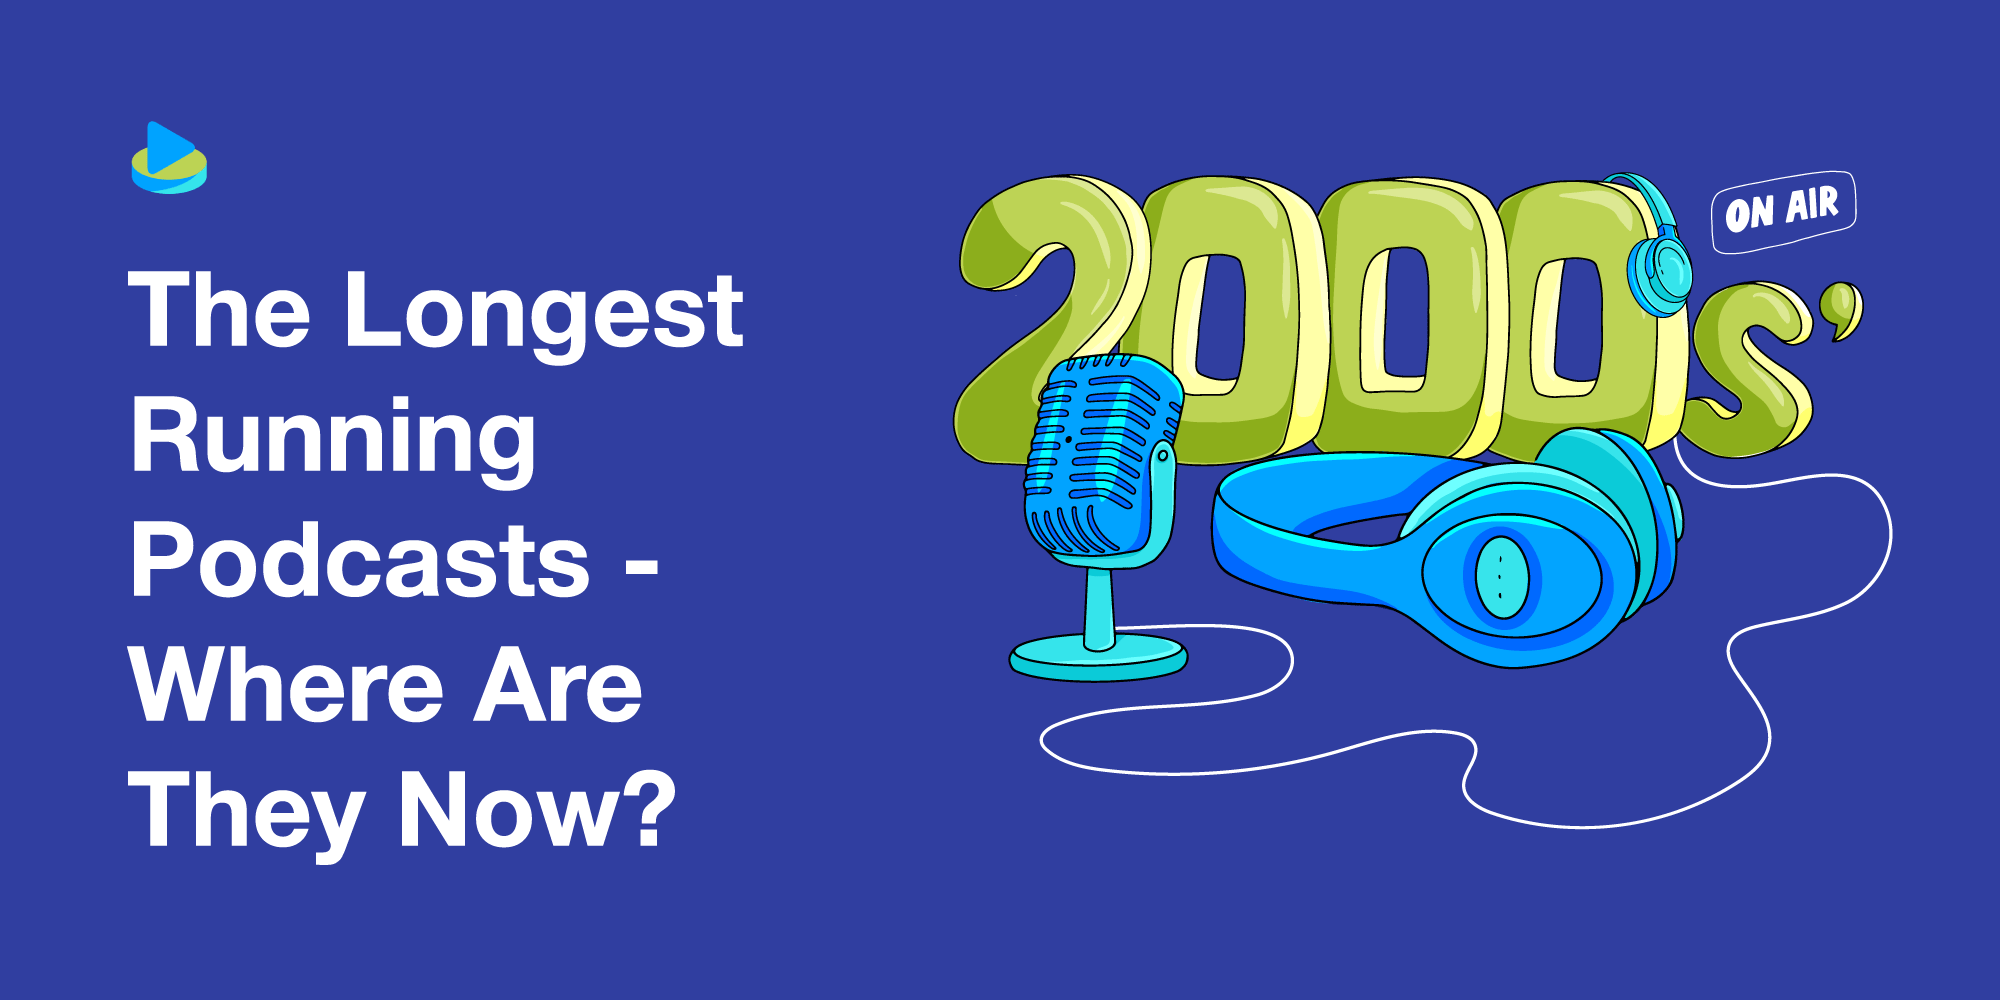 The Longest Running Podcasts: Where Are They Now?